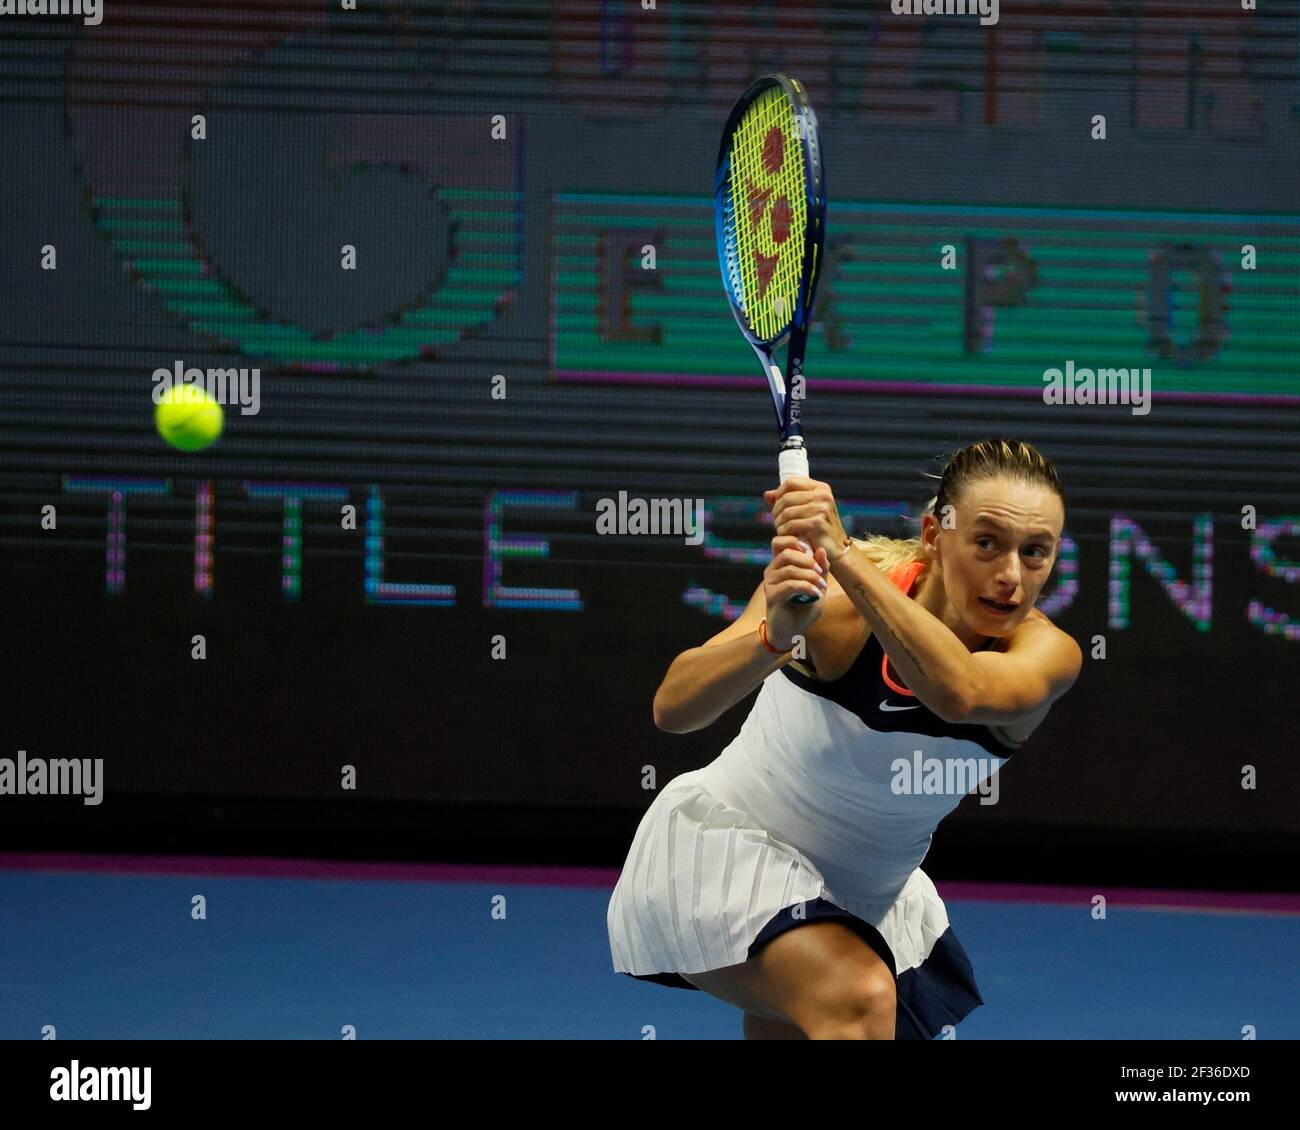 Saint Petersburg, Russia - 15 March 2021: Tennis, Ana Bogdan of Romania  plays during a match against